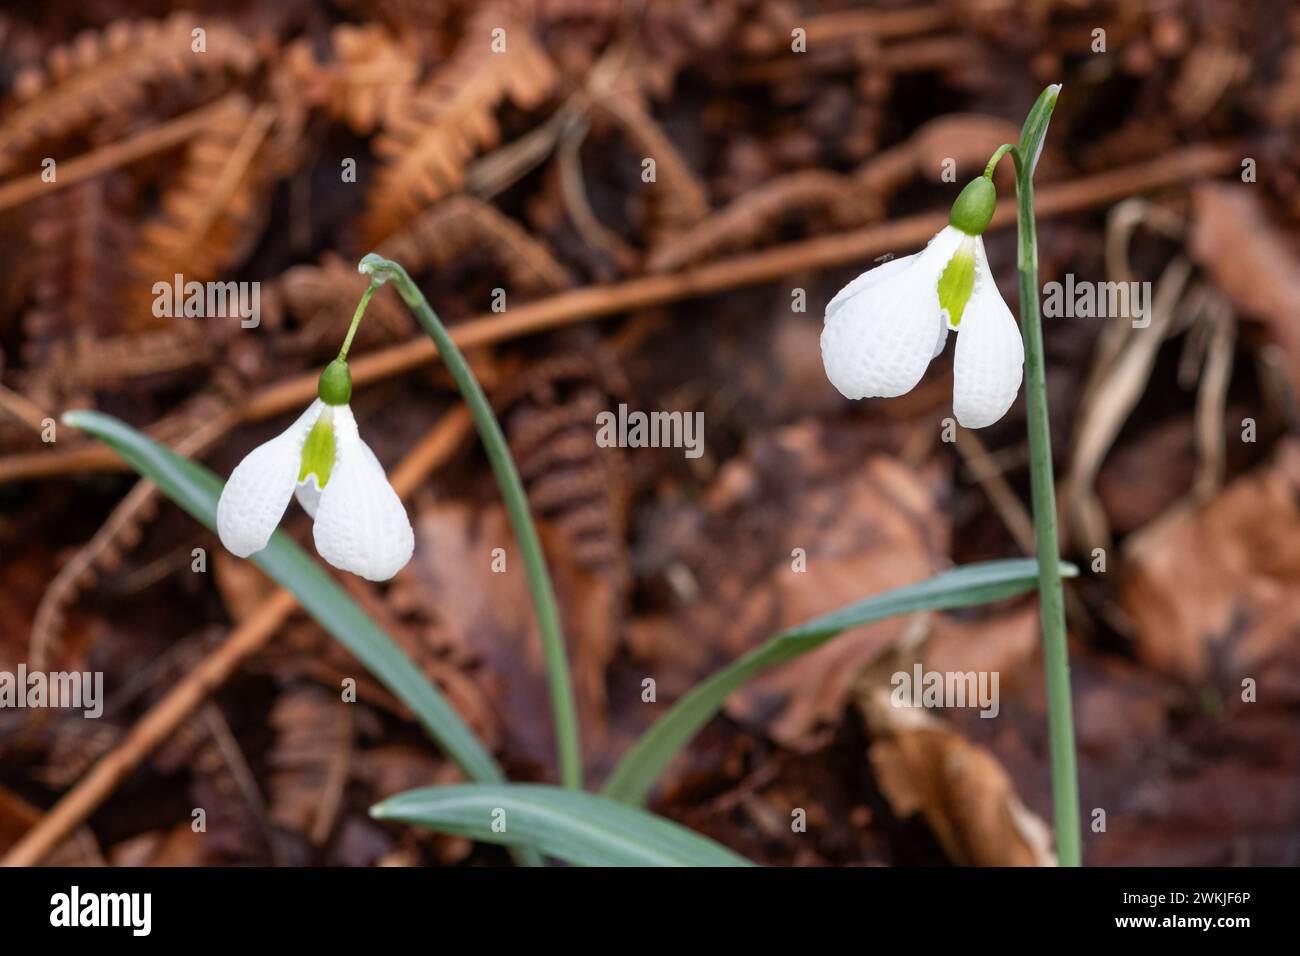 Galanthus plicatus 'Augustus' flowers, snowdrop 'Augustus' variety of snowdrops with unusual dimpled petals, flowering during February, England, UK Stock Photo